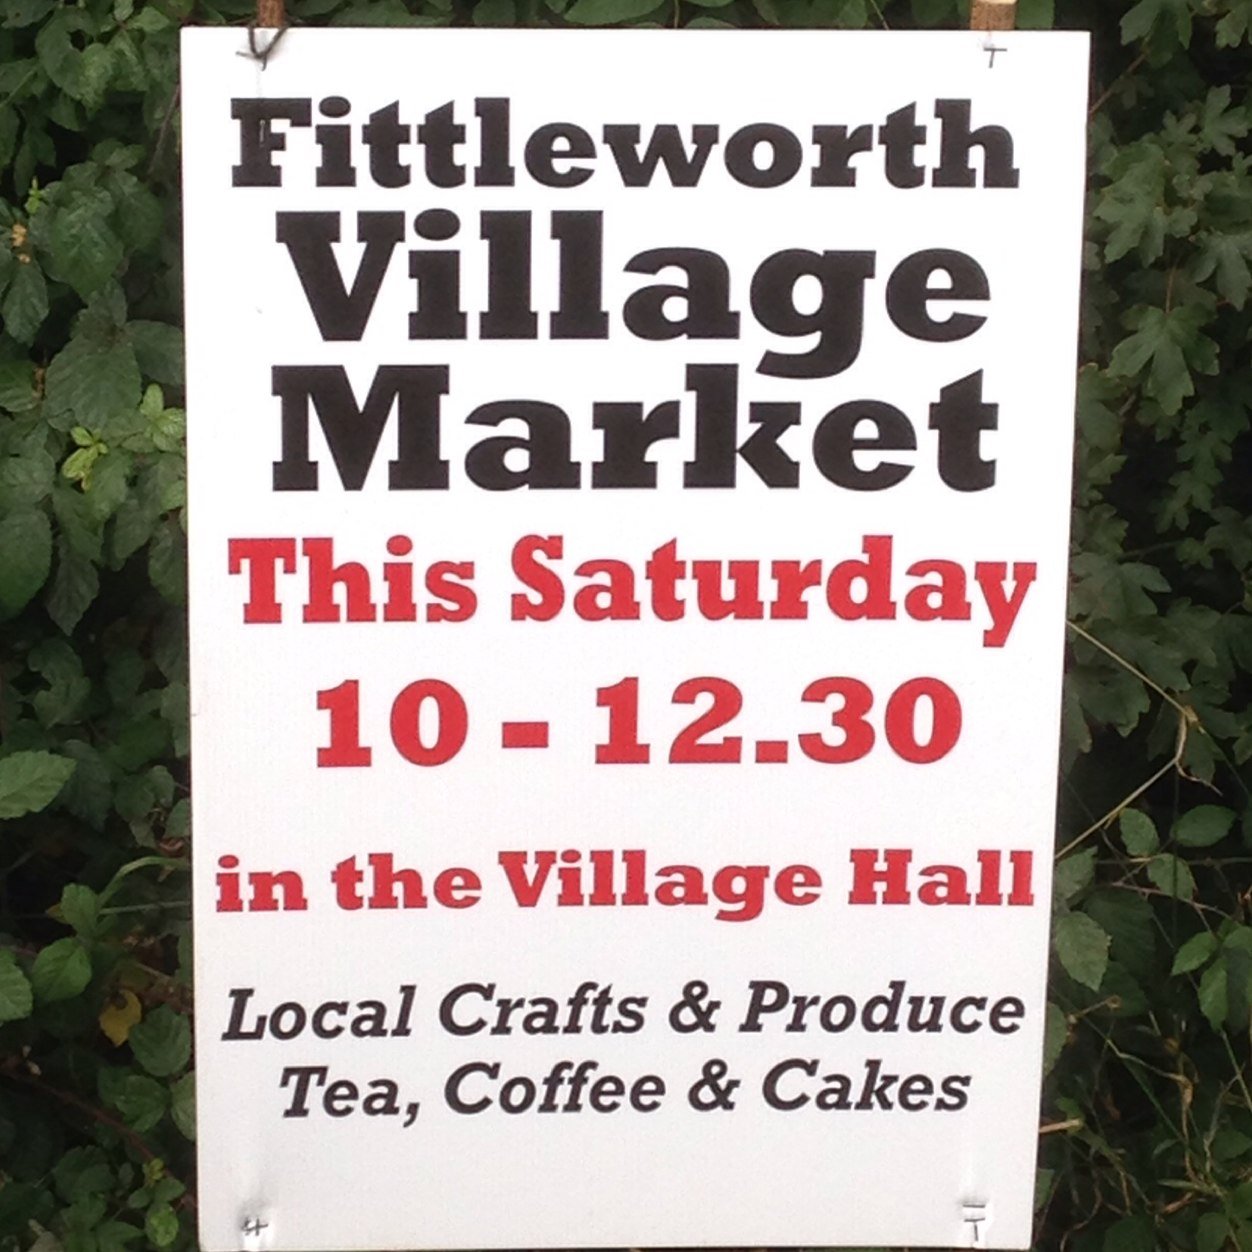 Fittleworth village Christmas market 29 November 2014, local produce, arts & crafts & refreshments too